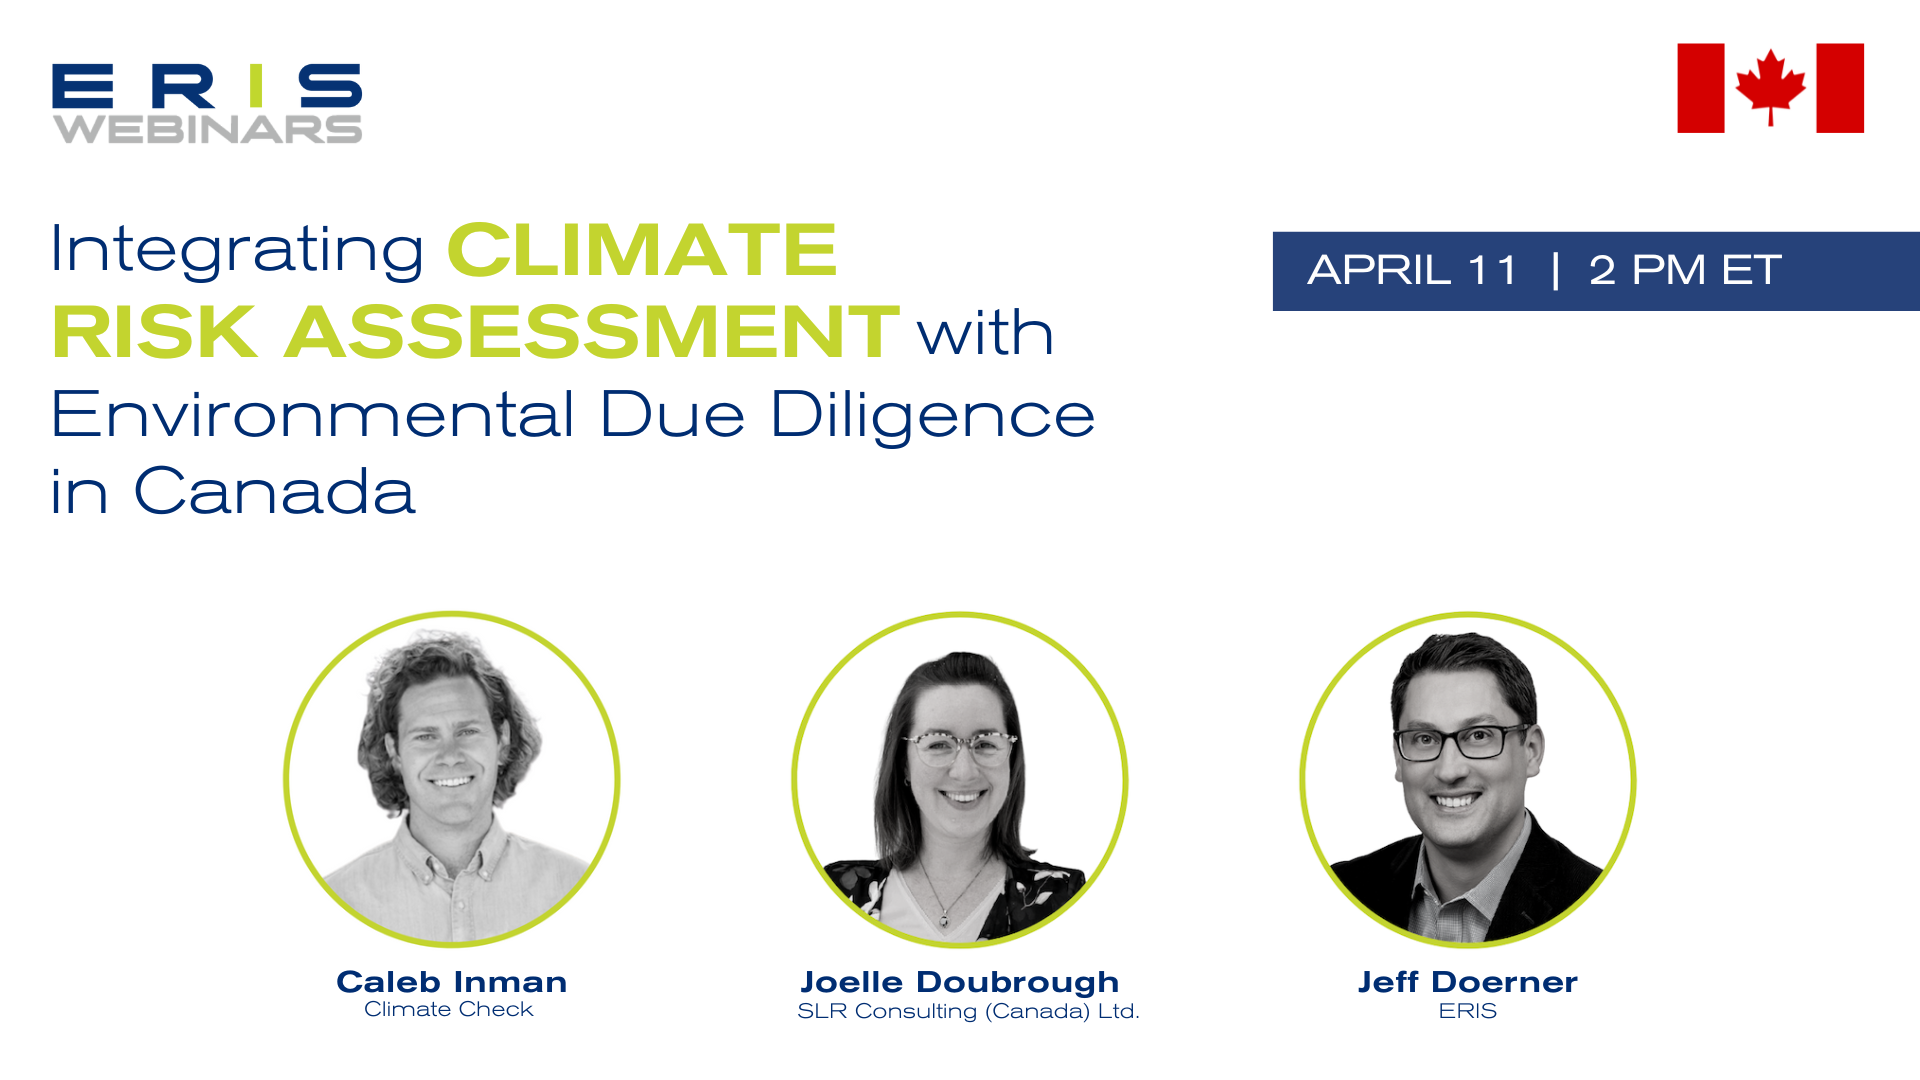 Integrating Climate Risk Assessment with Environmental Due Diligence in Canada